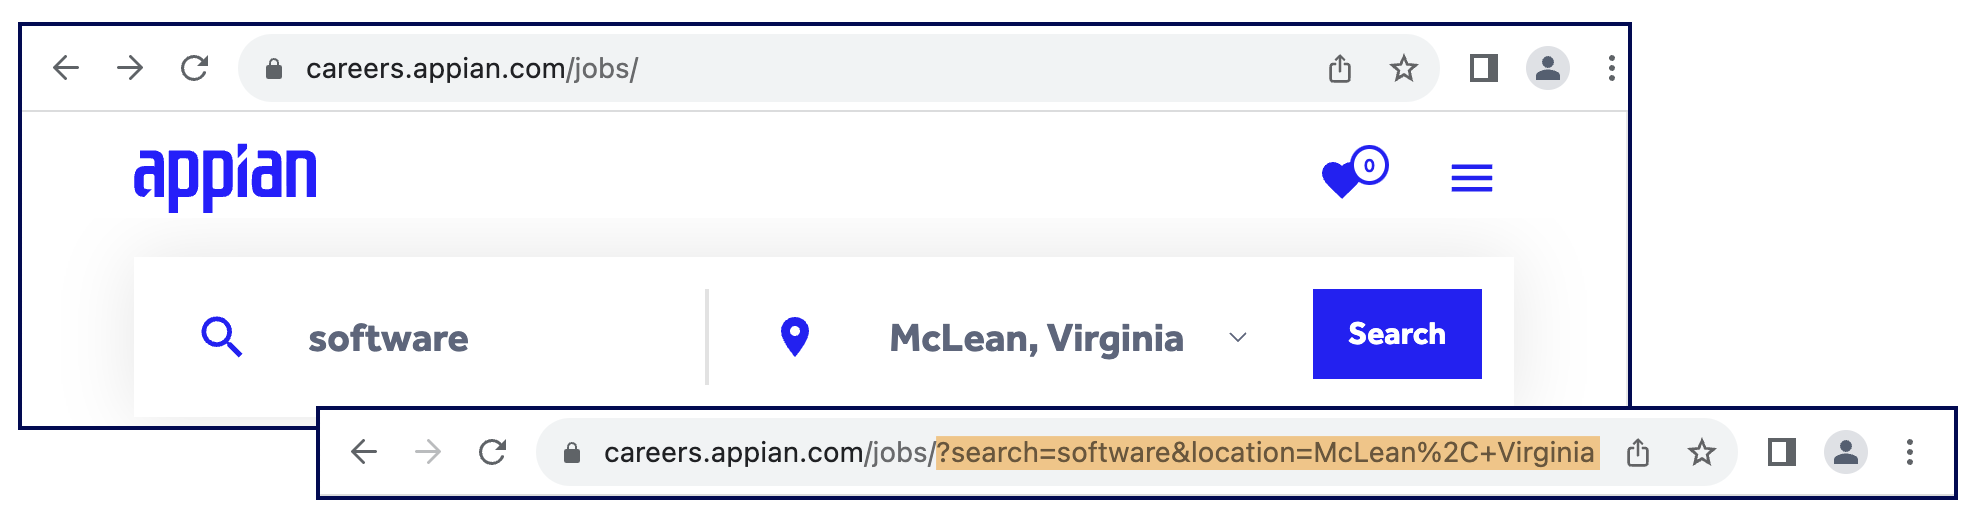 career search example